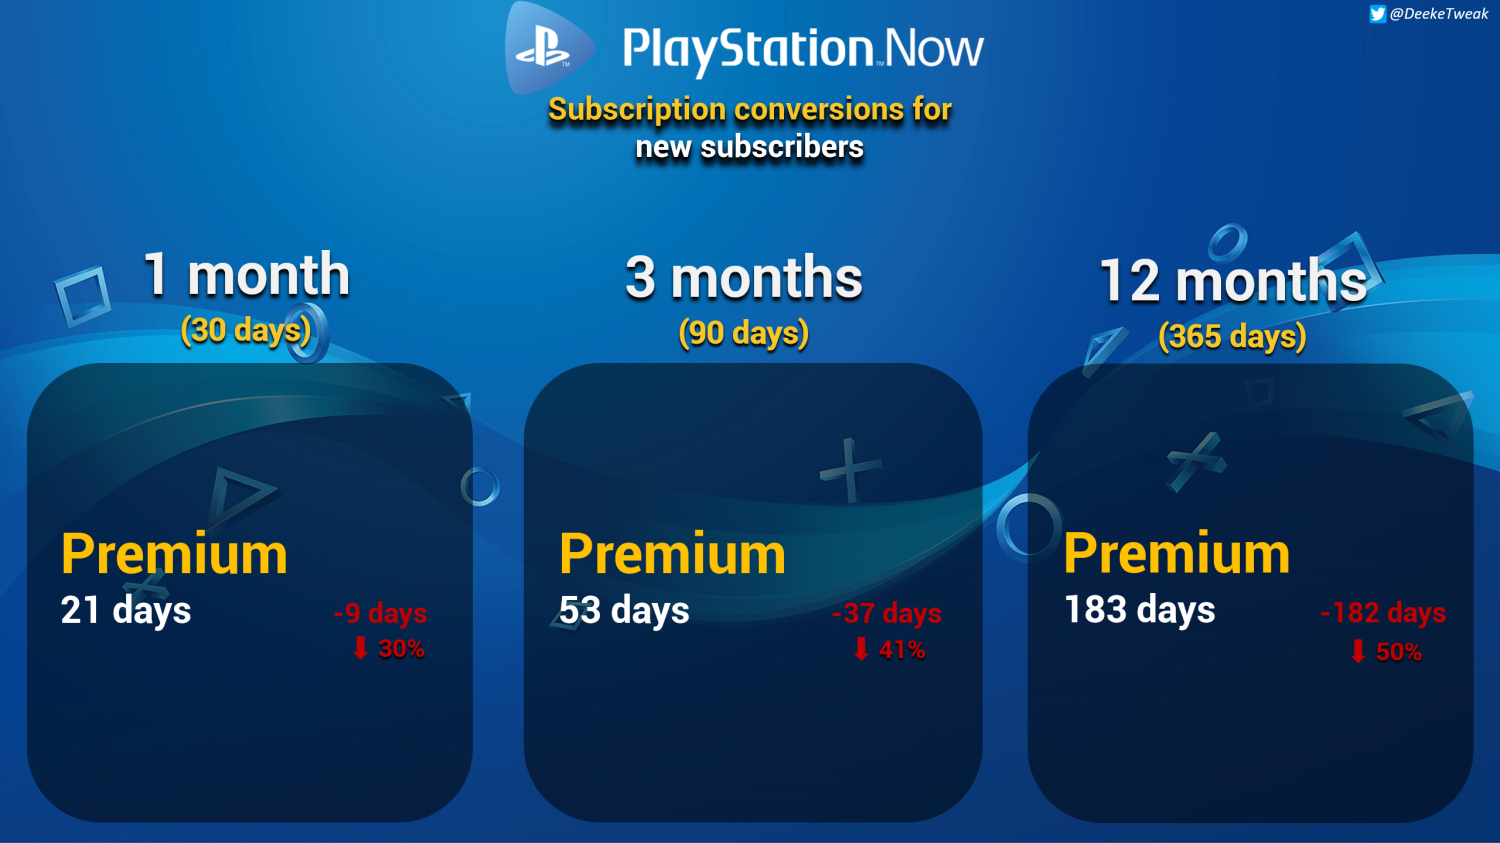 PS Plus vs. PS Now: Which one should you get? - Neowin